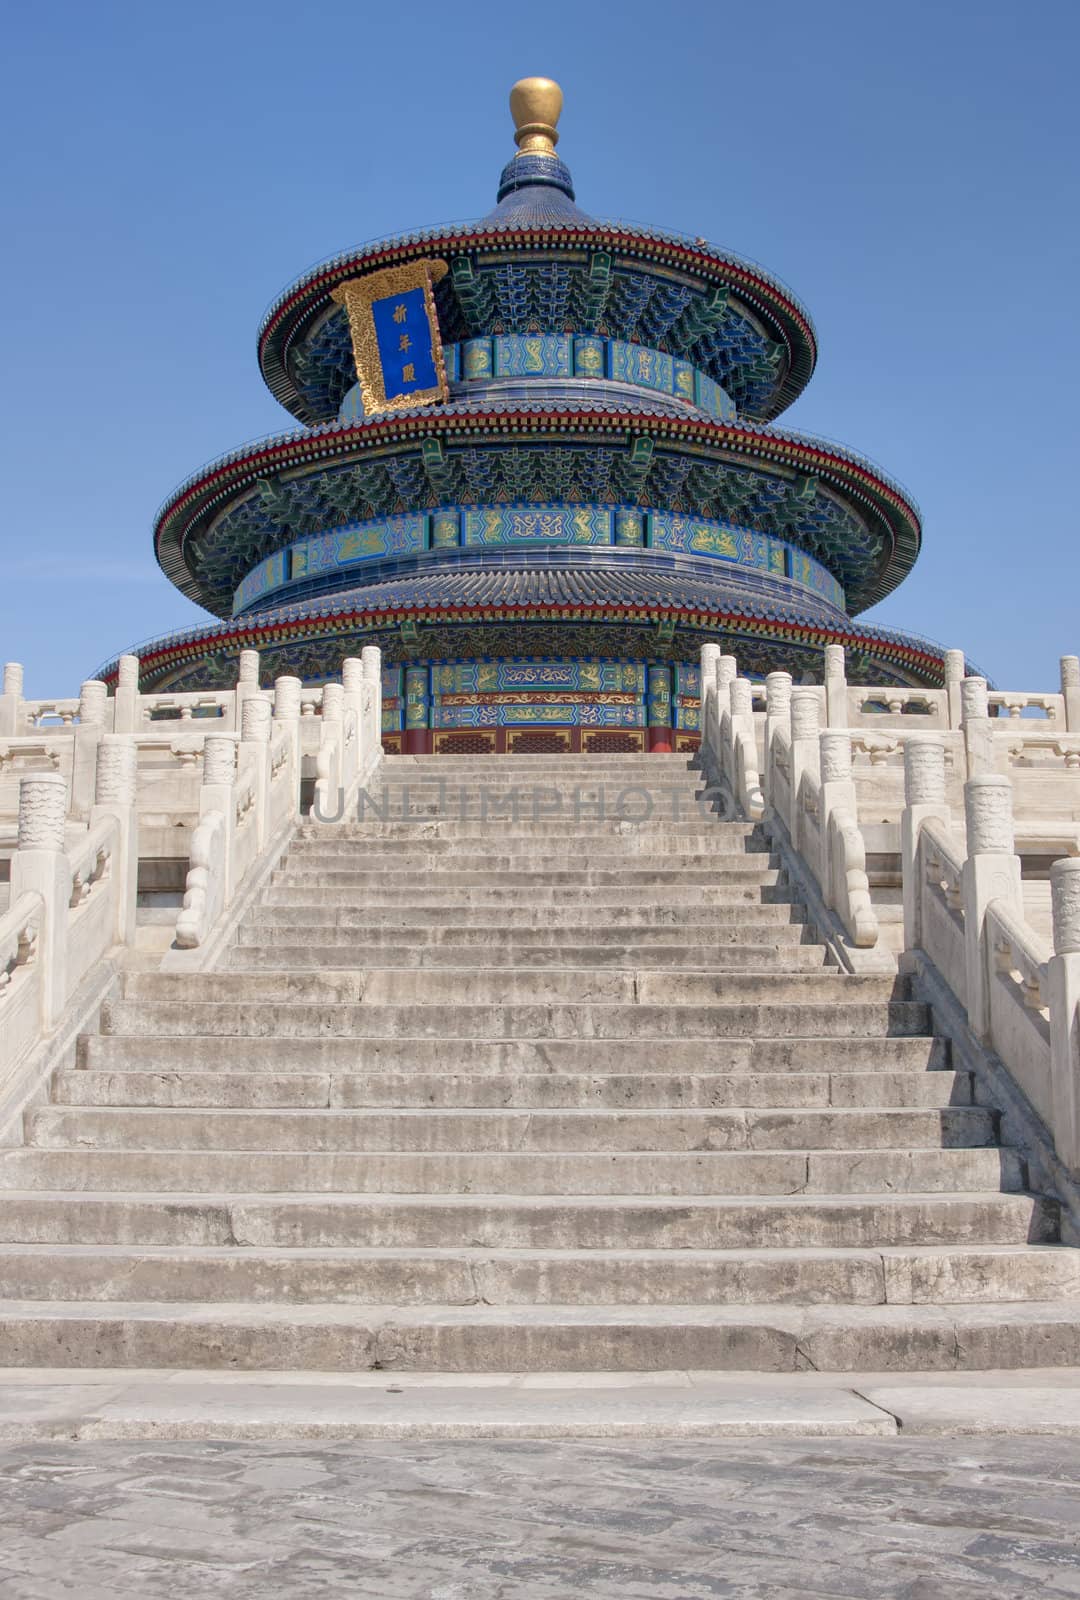 Beijing Temple of Heaven: stairs to the tower.